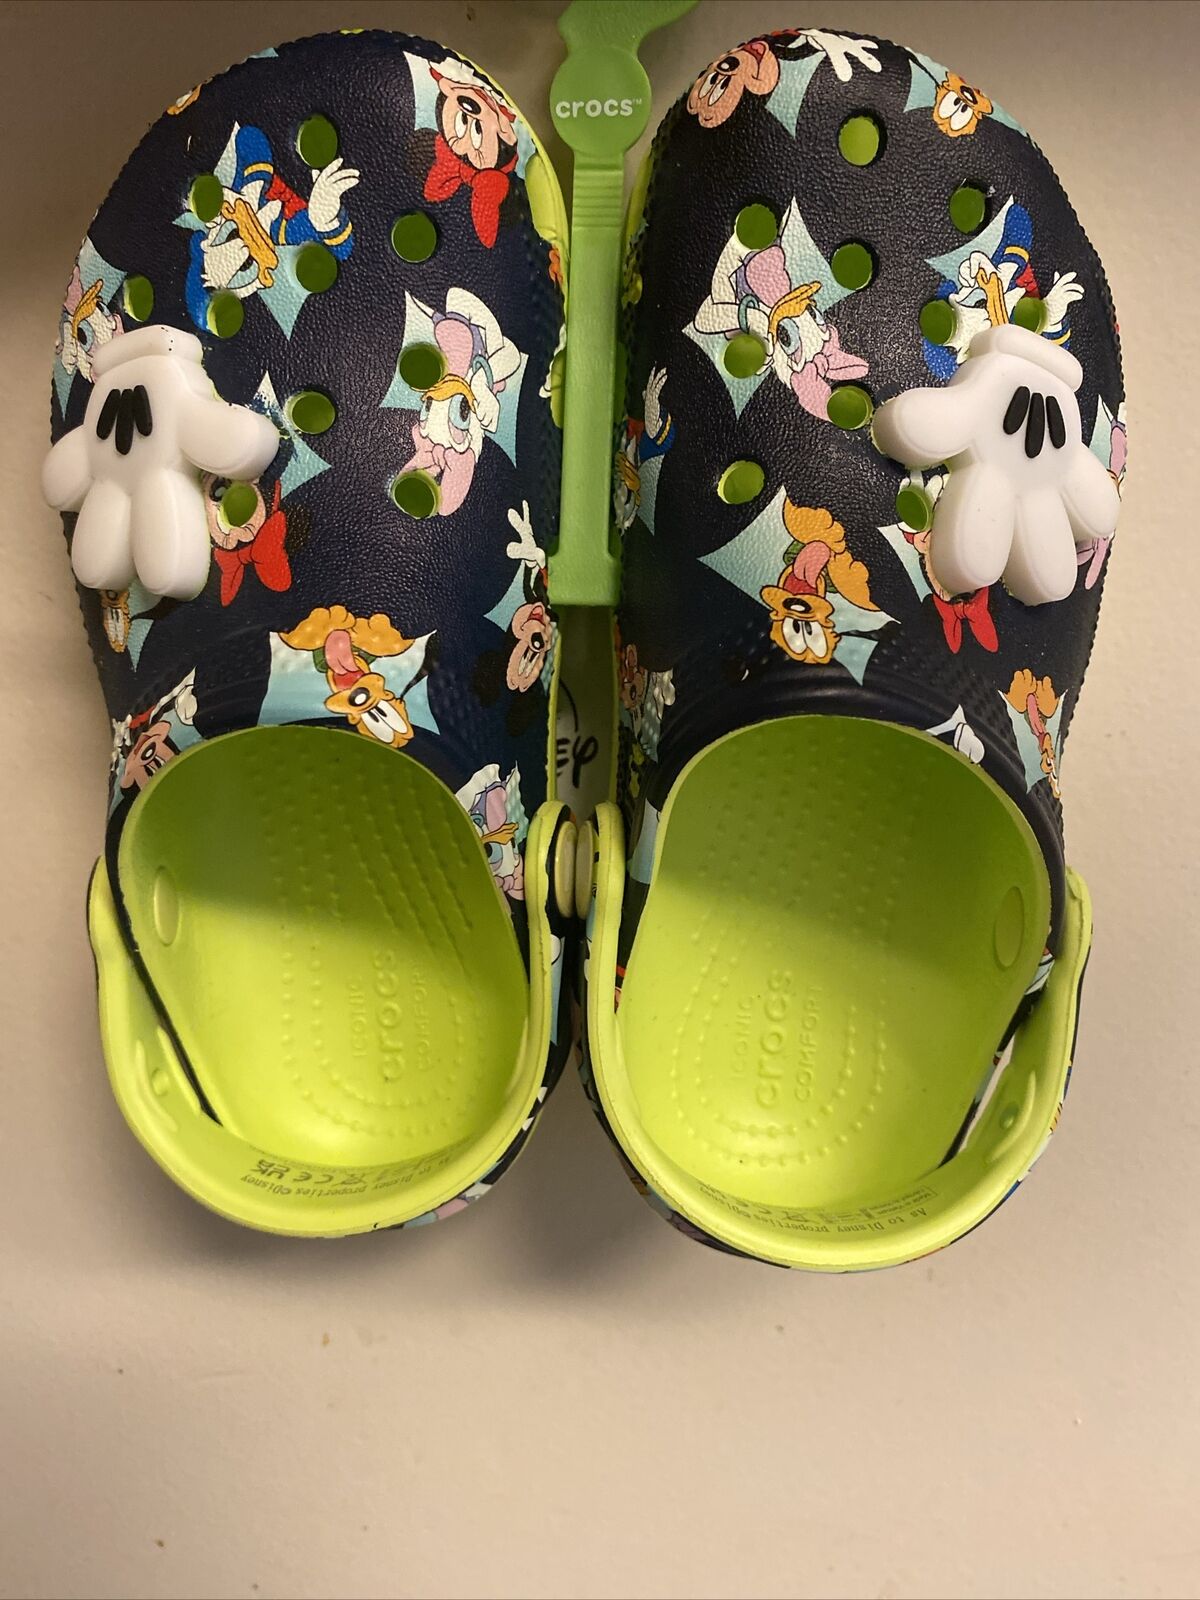 Disney Mickey Mouse and Friends Crocs Clogs Kids Child Size 11 *LIGHT UP* New